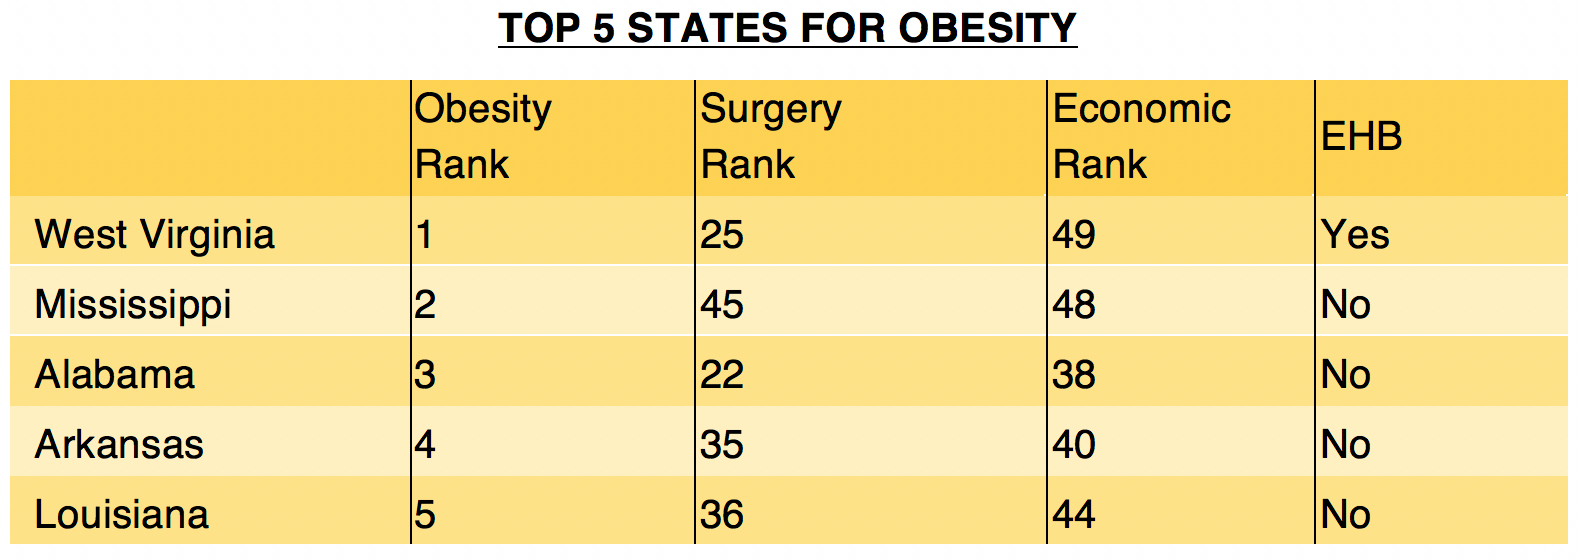 TOP 5 STATES FOR OBESITY